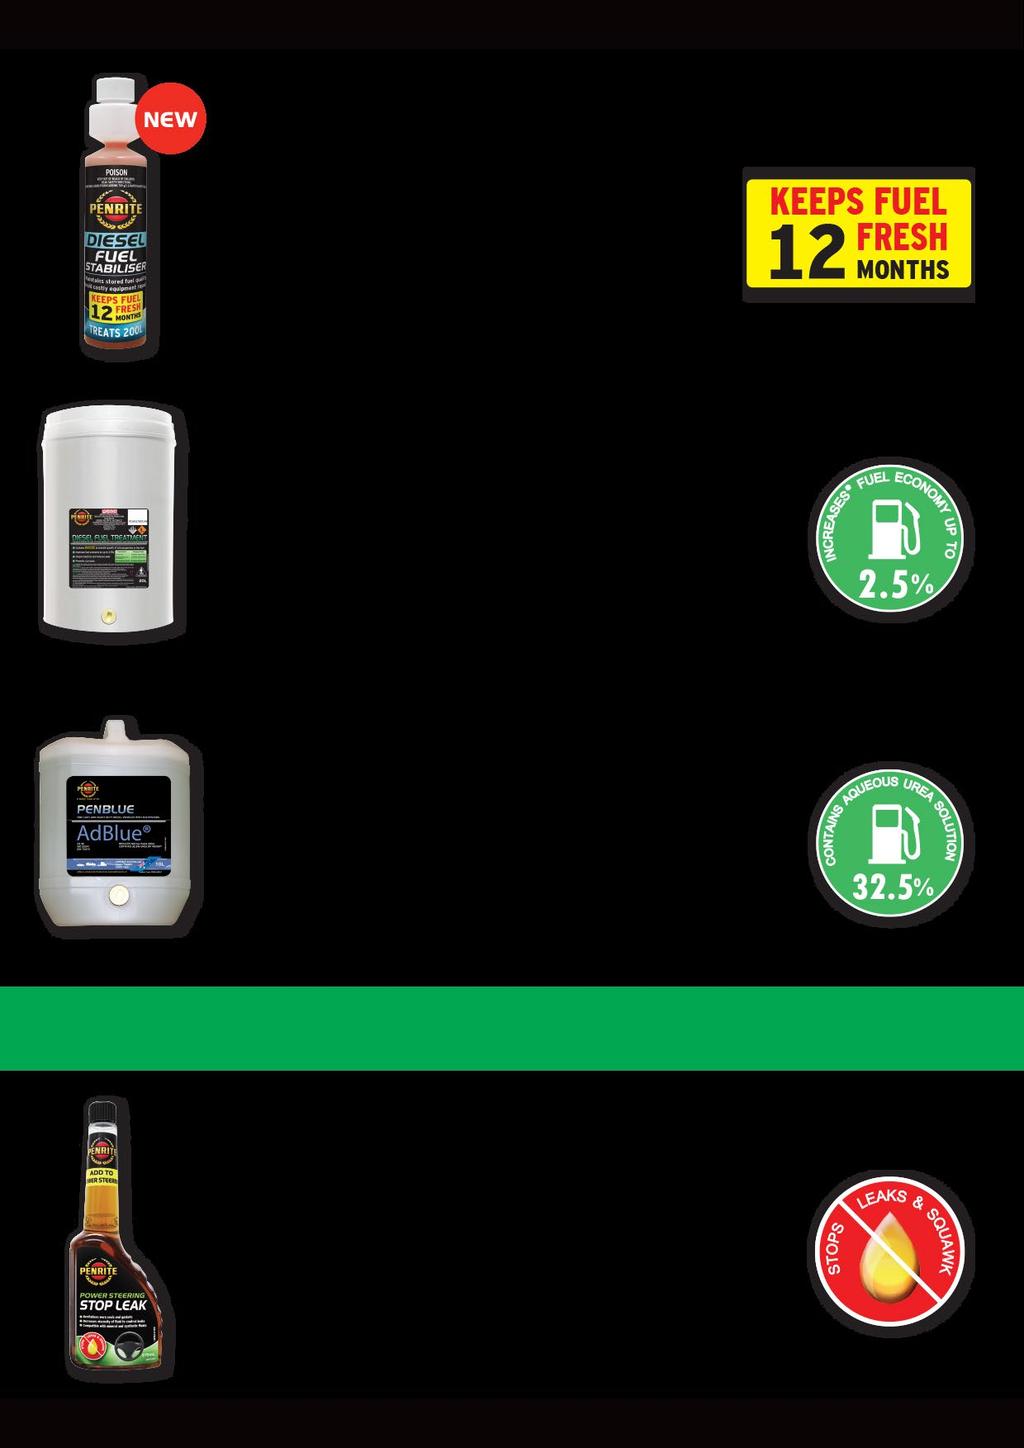 DIESEL FUEL STABILISER Penrite Diesel Fuel Stabiliser is a fuel additive designed to stabilise the performance of diesel fuel when in storage and prevent loss of engine performance due to old and